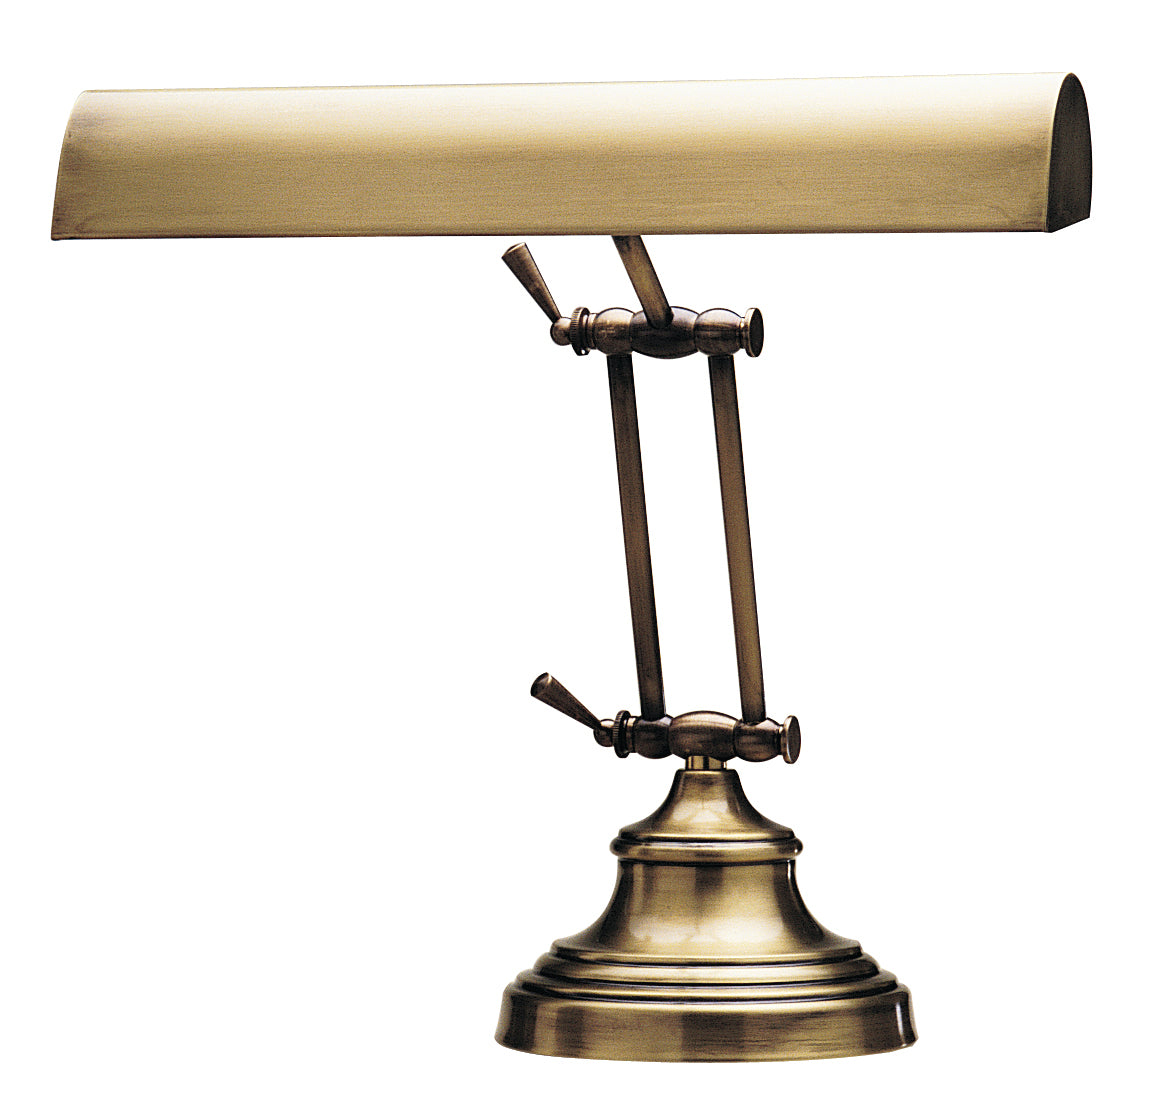 House of Troy Desk/Piano Lamp 14" Antique Brass P14-231-71